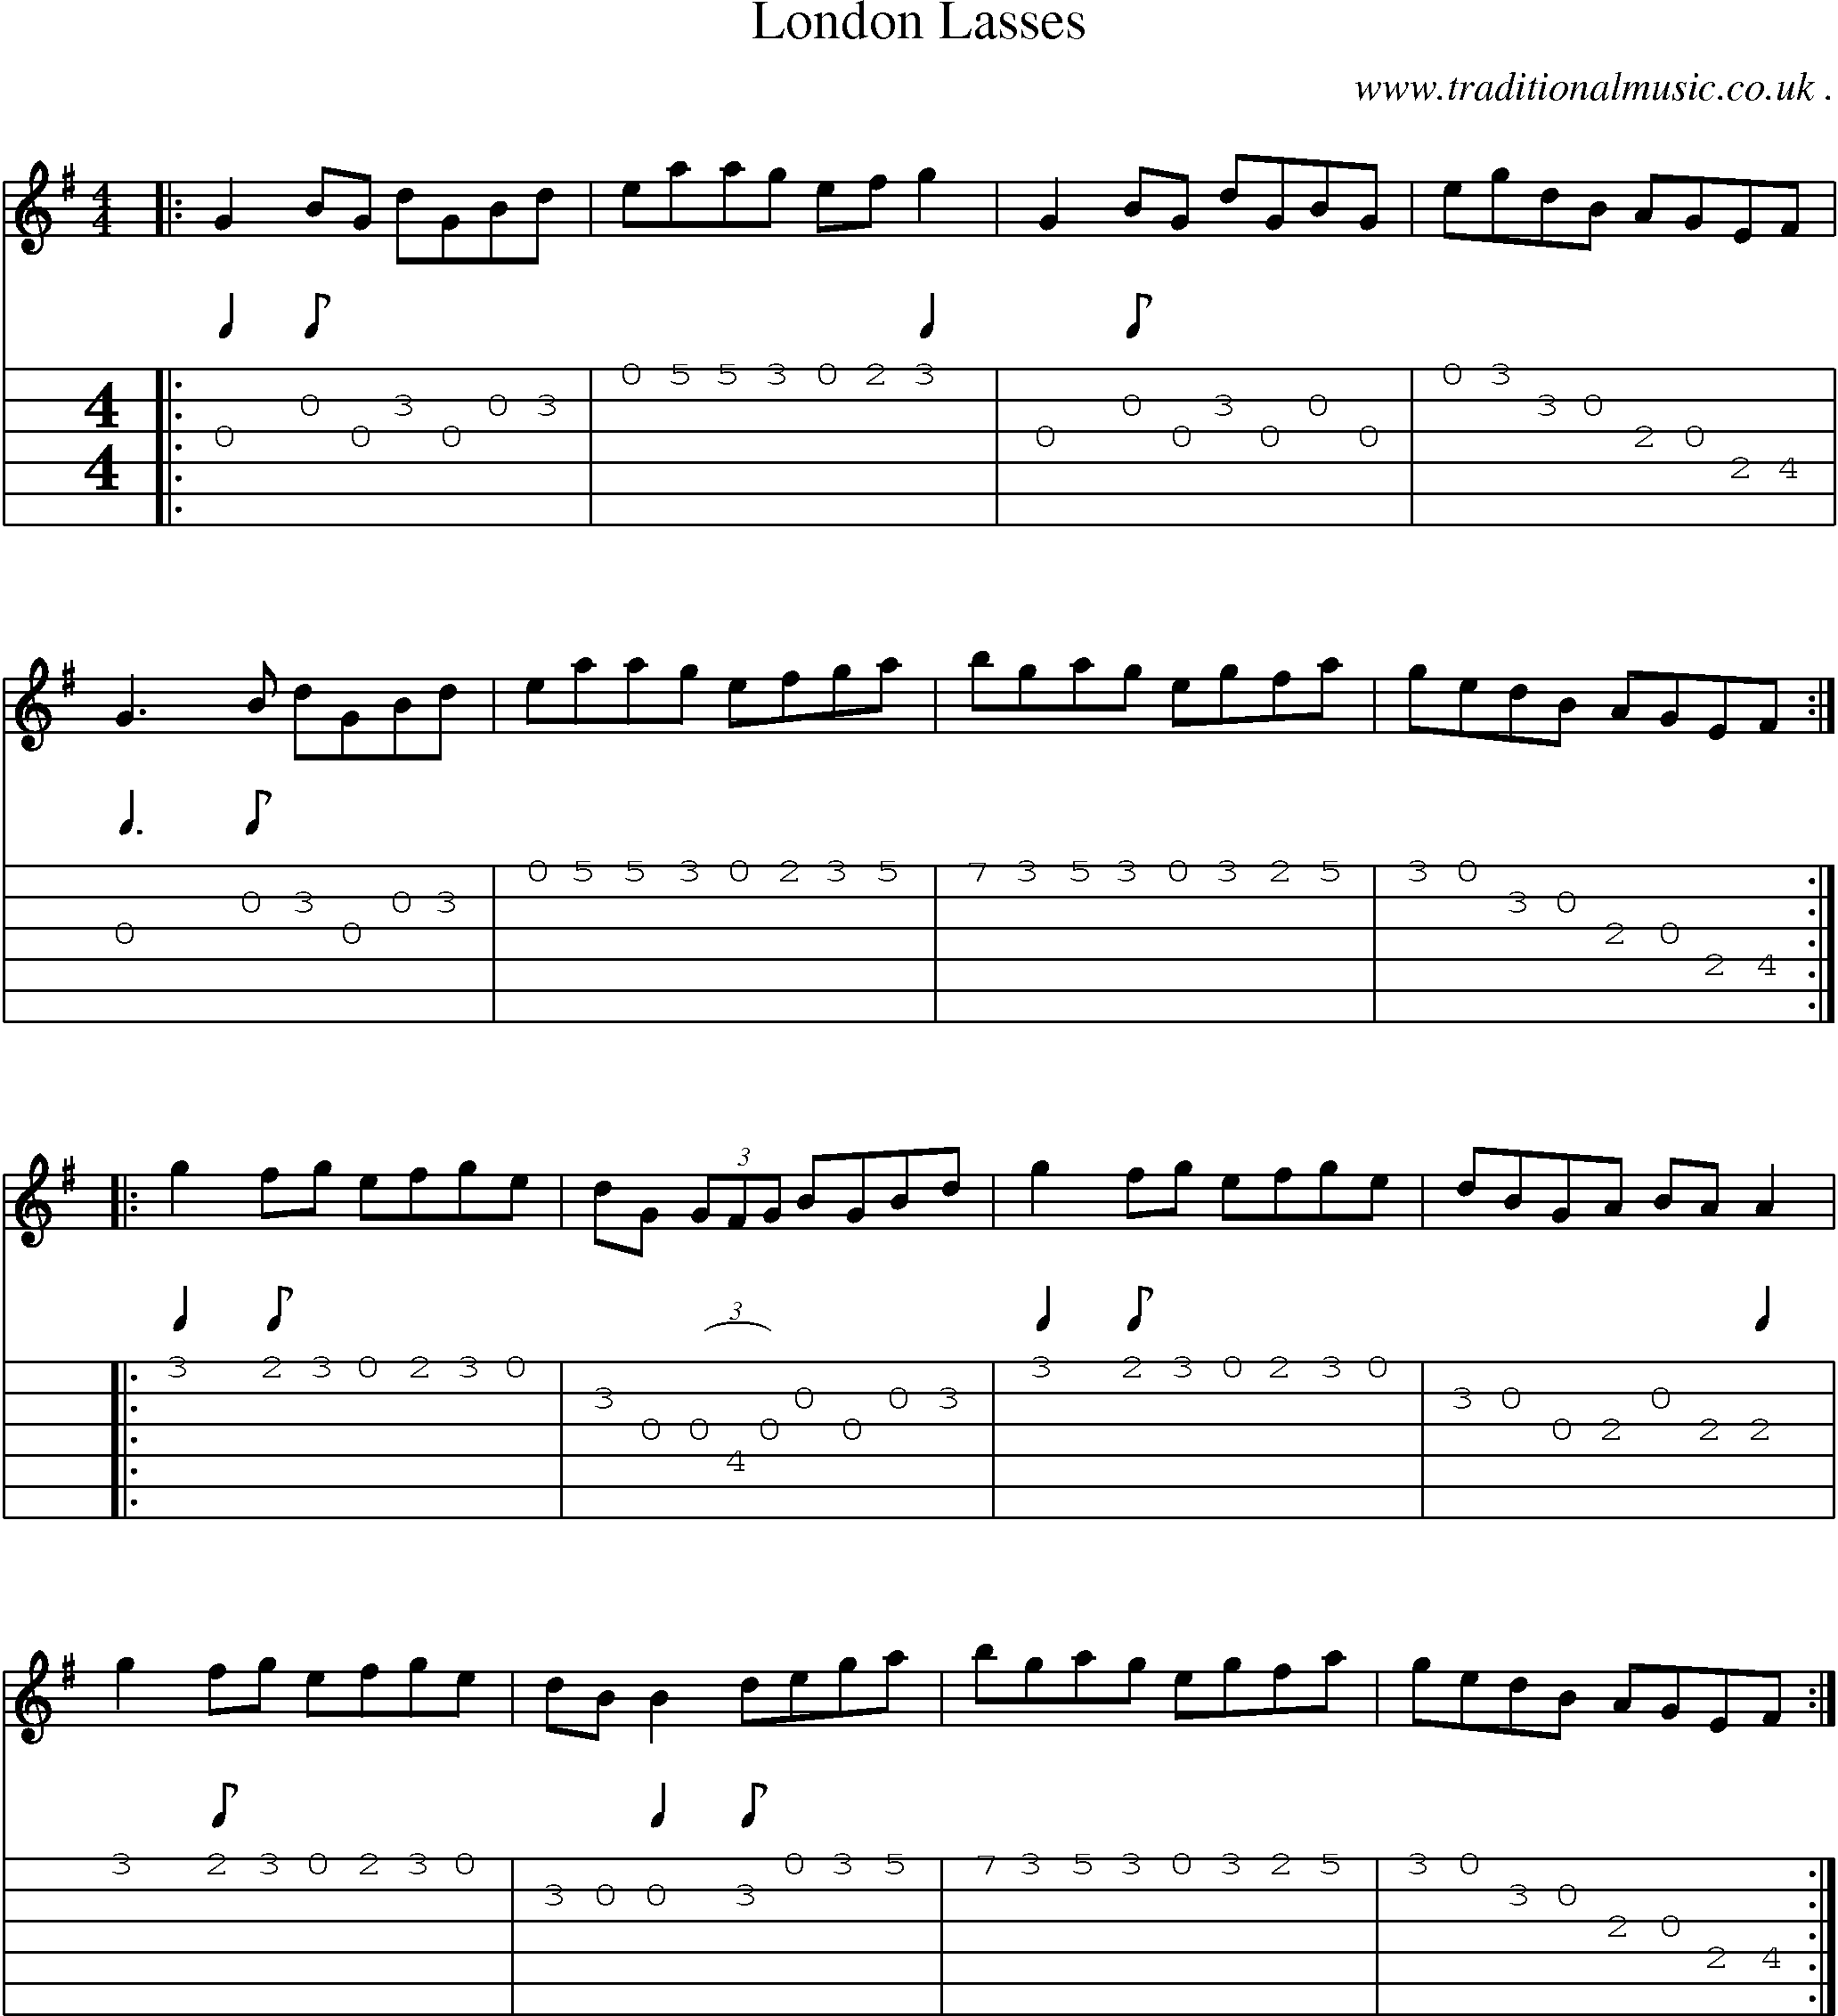 Sheet-Music and Guitar Tabs for London Lasses